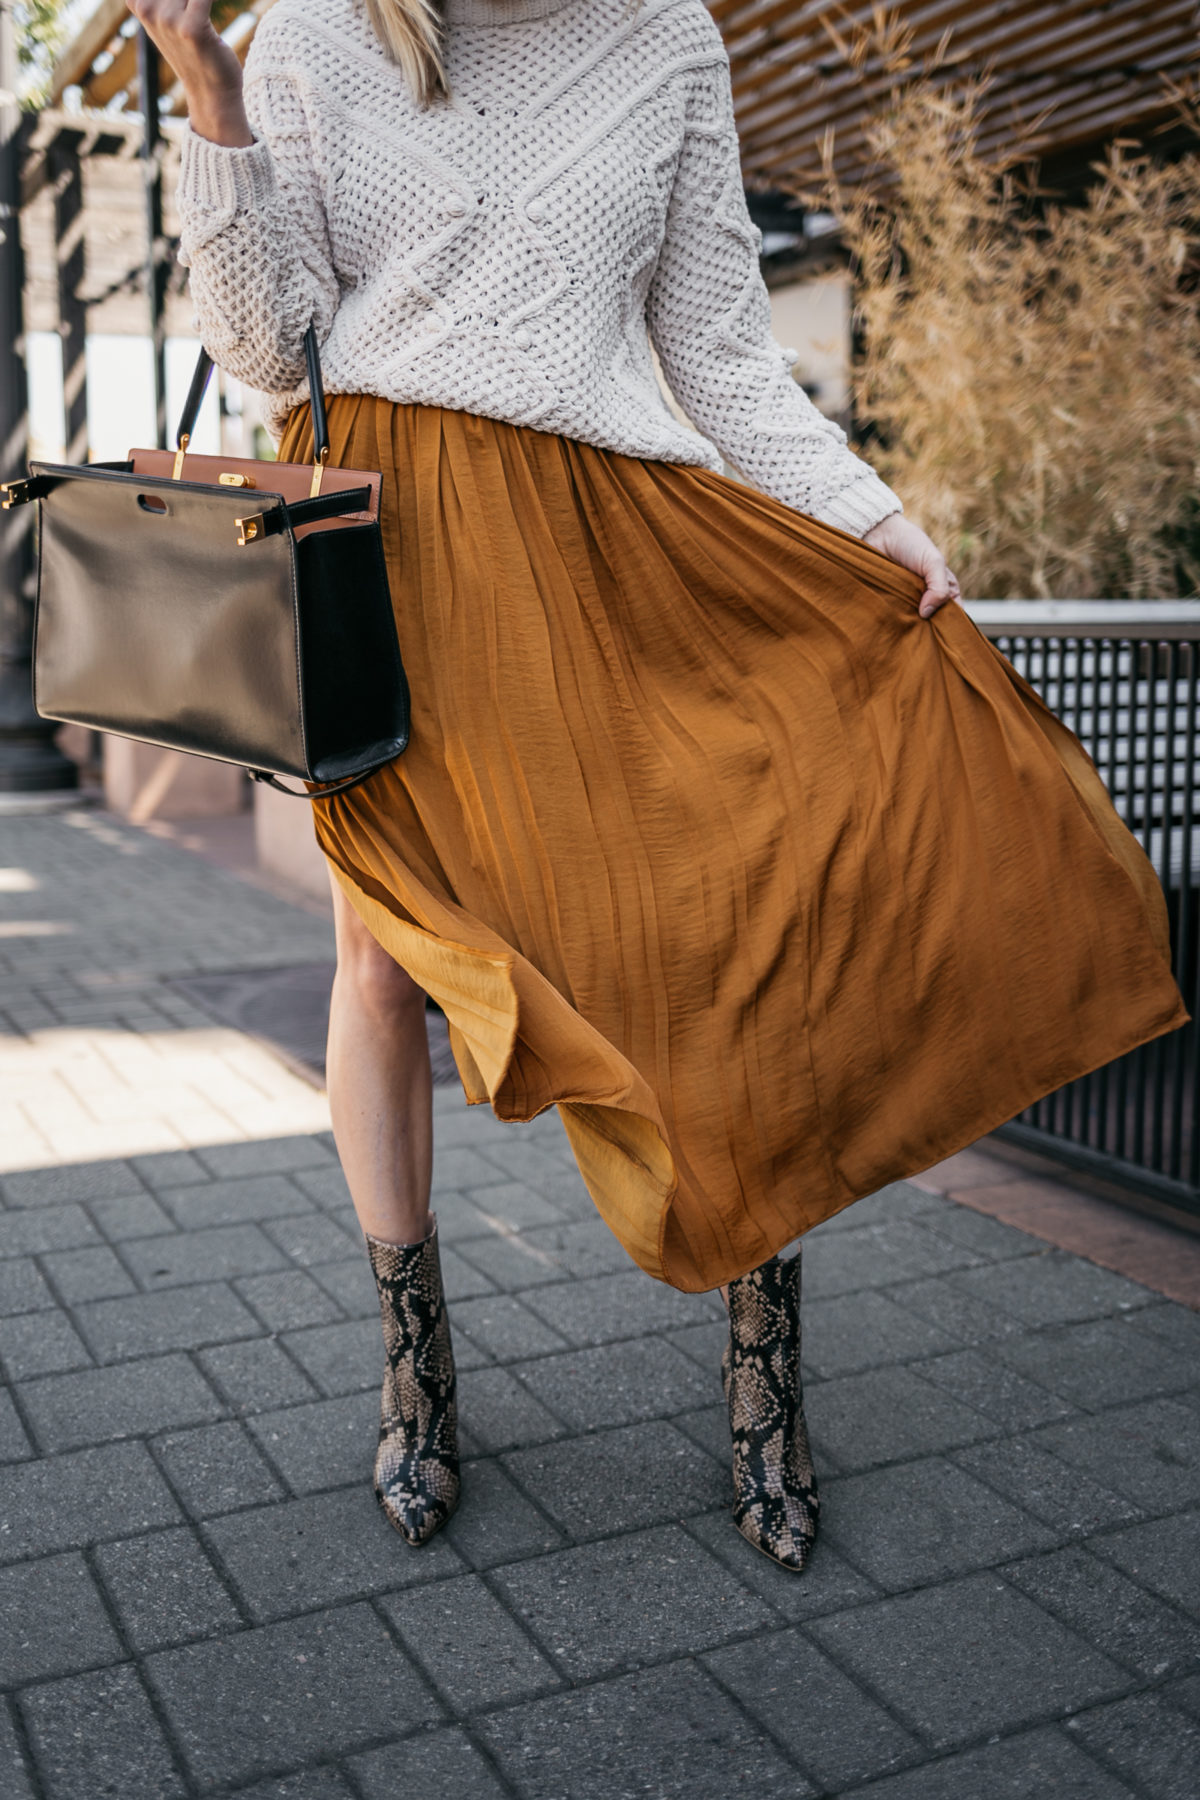 sweater over COPPER DRESS 